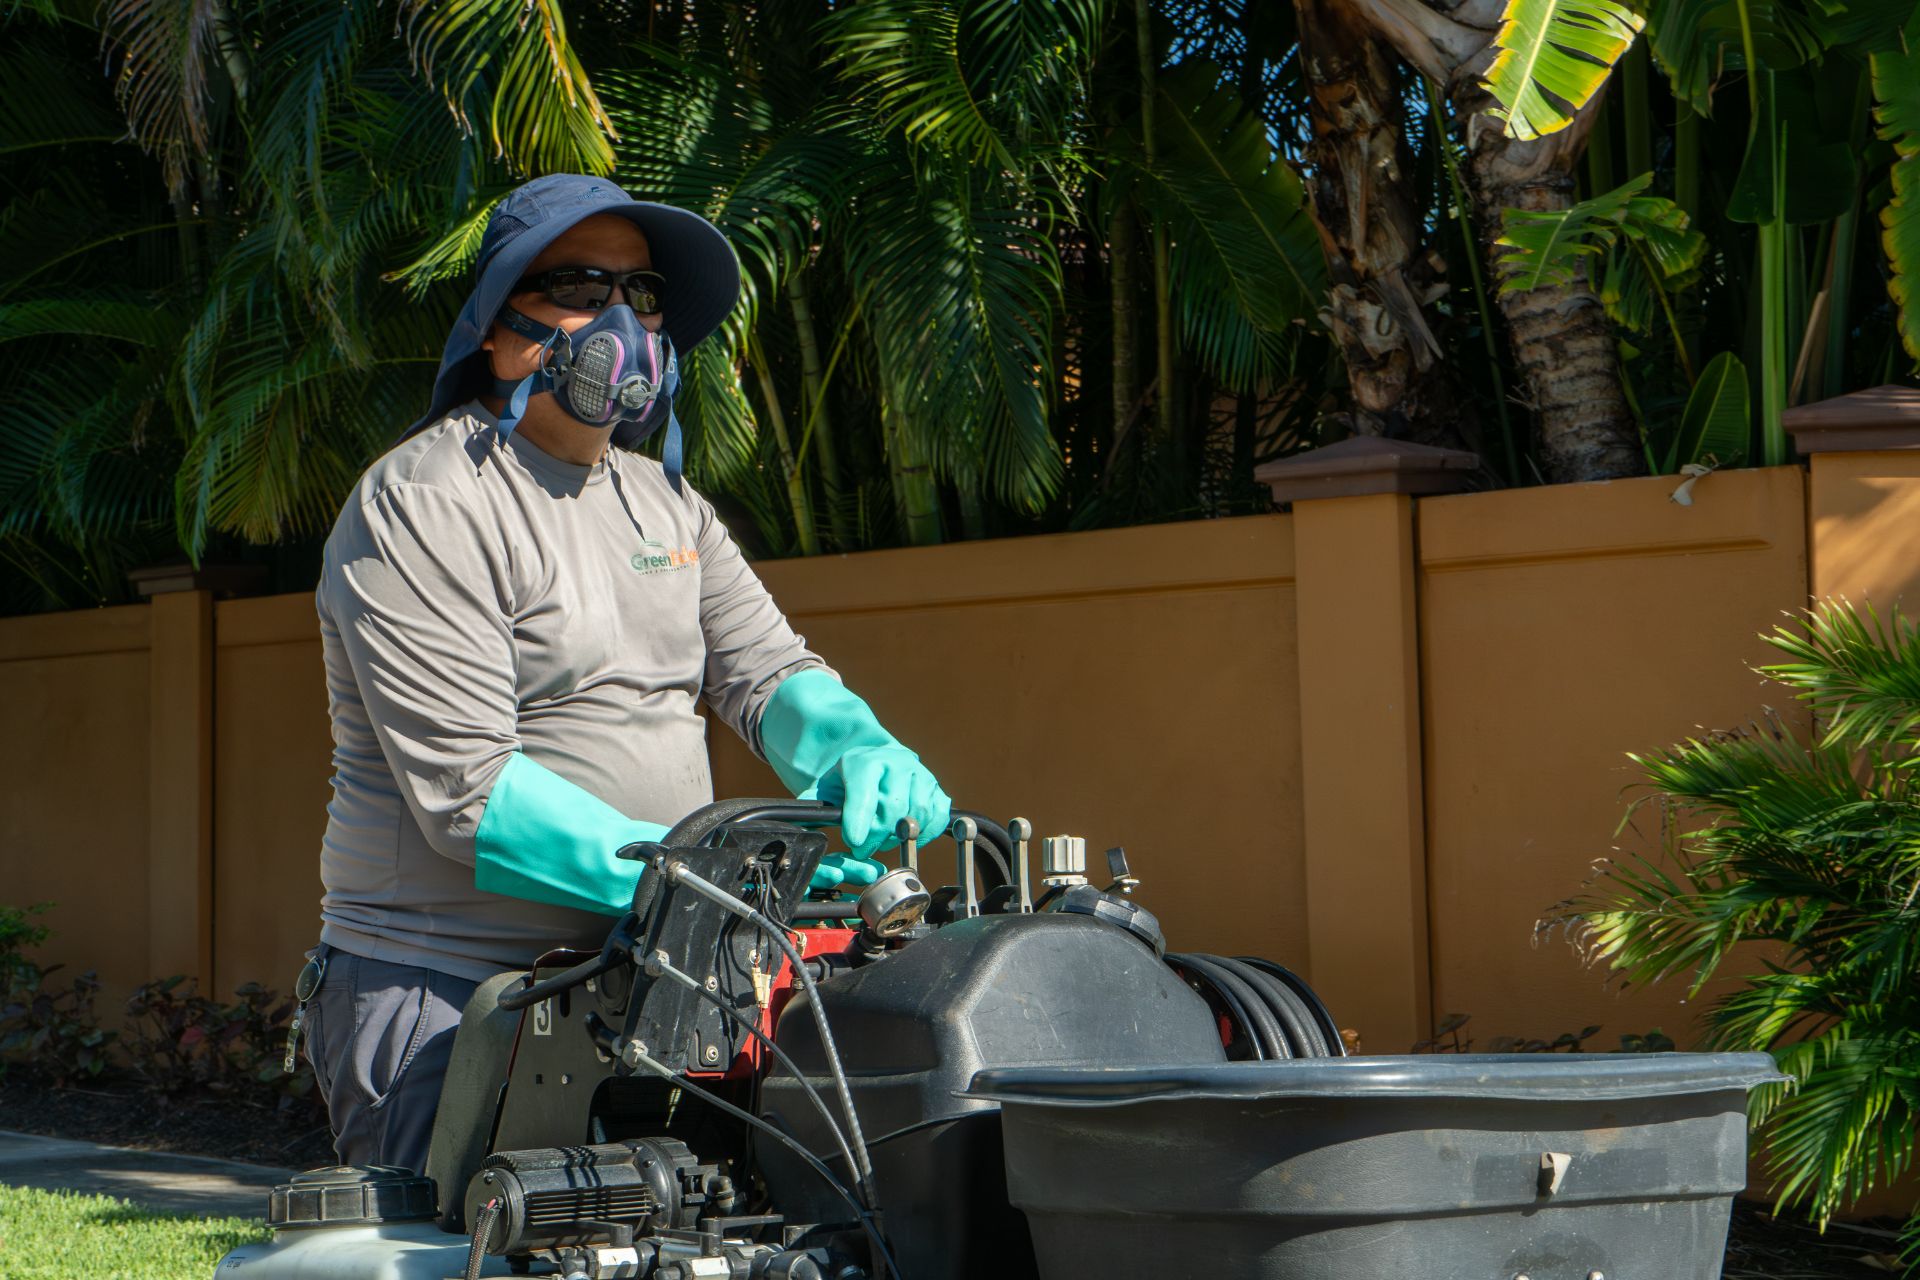 A GreenEdge staff member diligently applying pesticide in Bradenton. Our trained professionals follow strict guidelines and safety protocols to ensure effective pest control while minimizing environmental impact. Trust GreenEdge for expert pesticide application services that protect your property and promote a healthy outdoor environment.